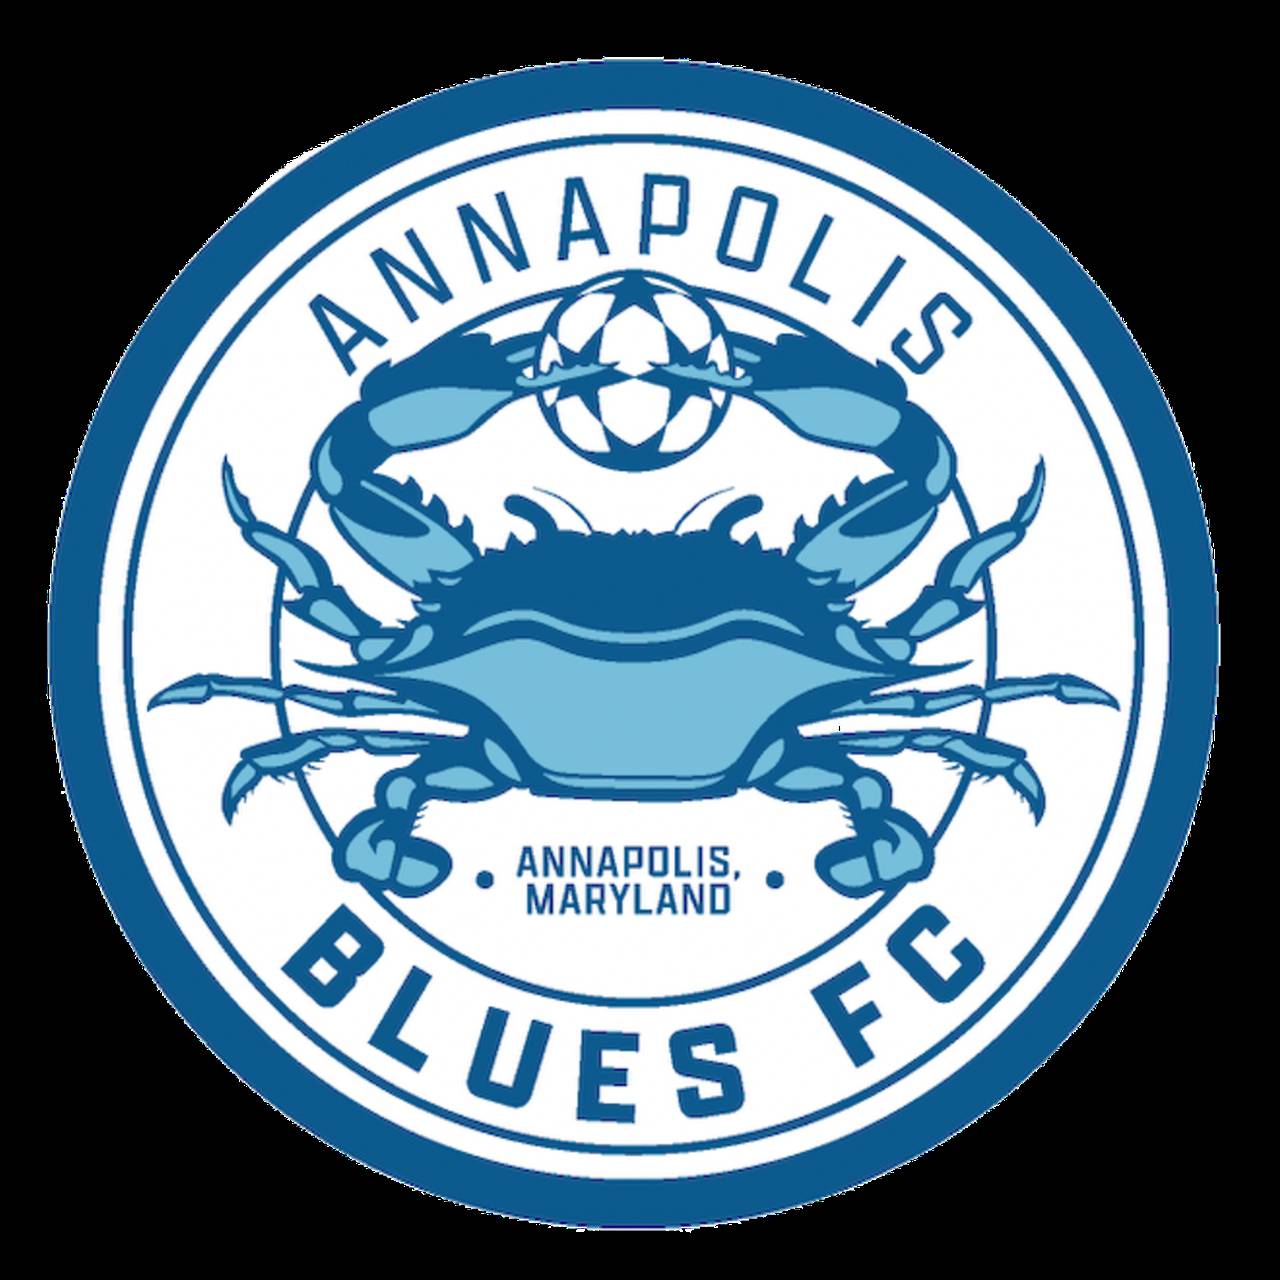 The Annapolis Blues football club - aka soccer - will play Frederick Saturday in the season home opener at Navy-Marine Corps Memorial Stadium.